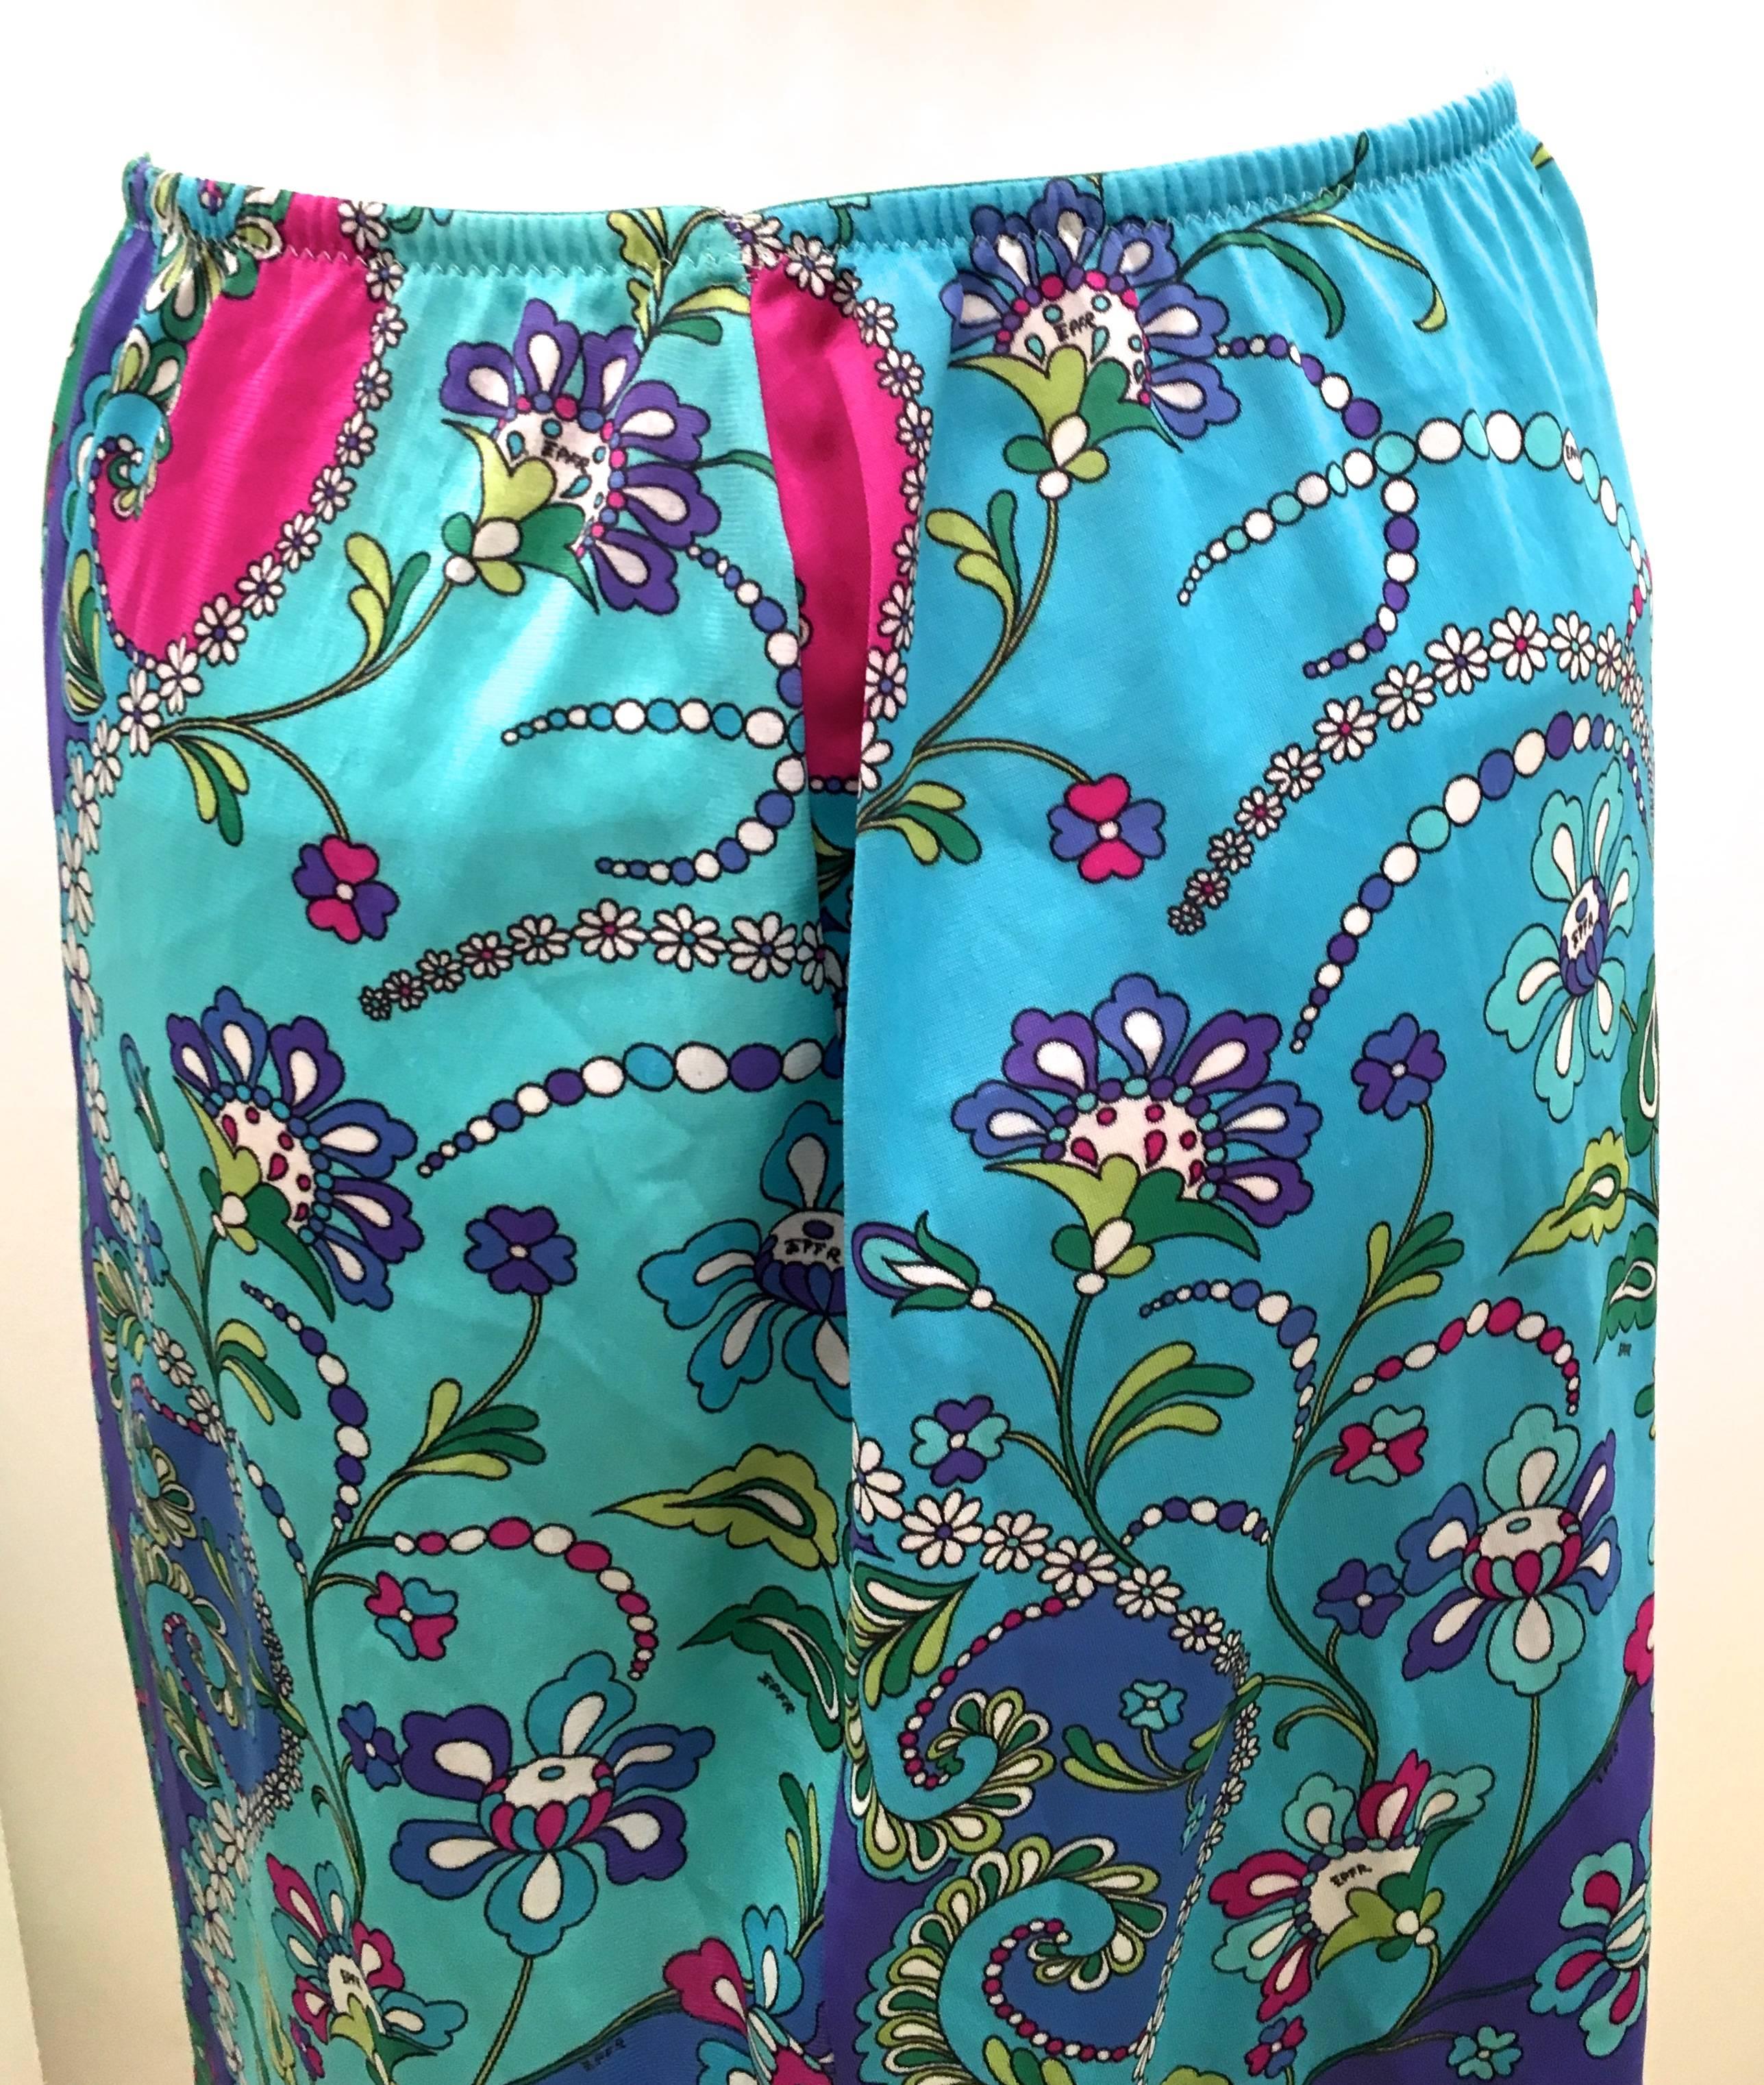 Vintage Pucci Skirt - Formfit Rogers - Late 1960's / Early 1970's In Excellent Condition For Sale In Boca Raton, FL